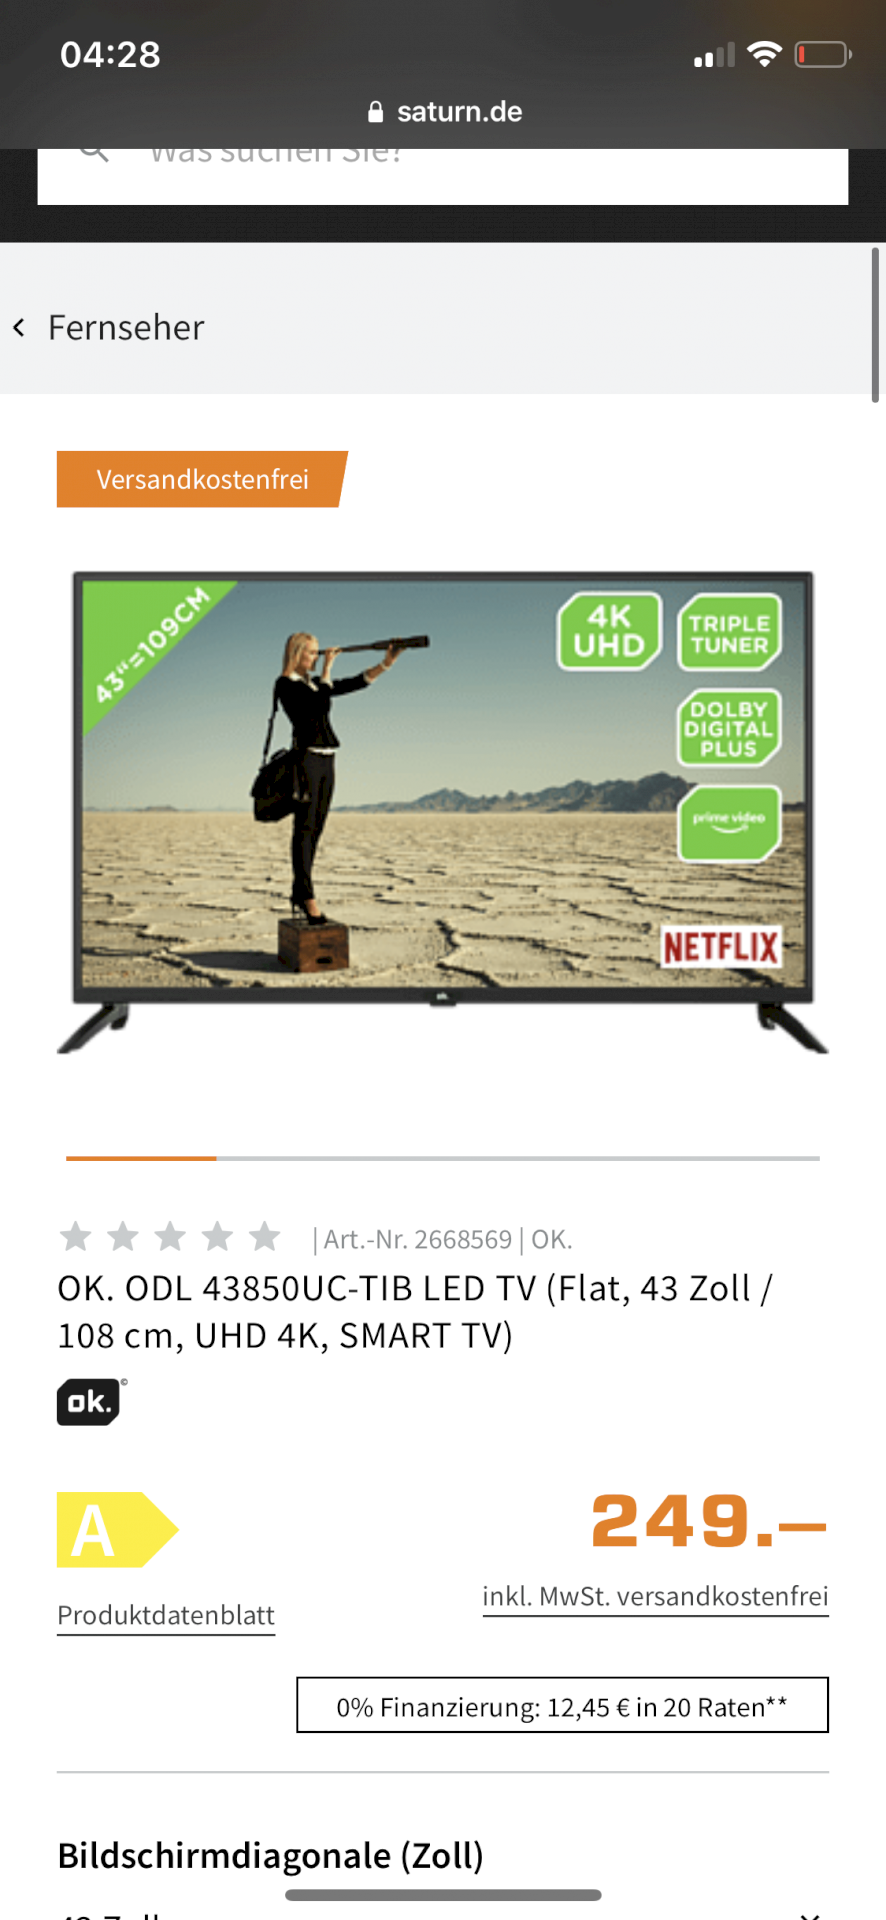 Is it worth it to buy a cheap 4k television or why are they so cheap and others cost 3-6 thousand